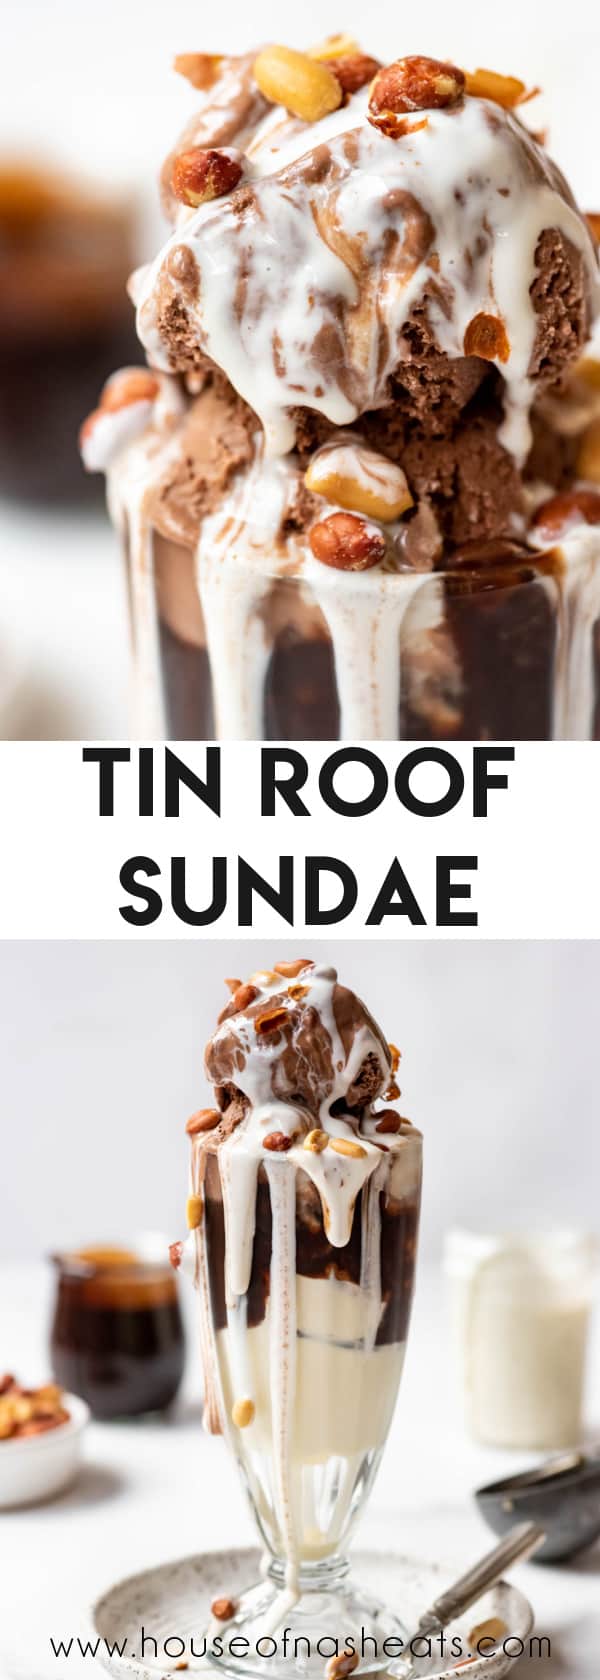 A collage of images of tin roof sundaes with text overlay.